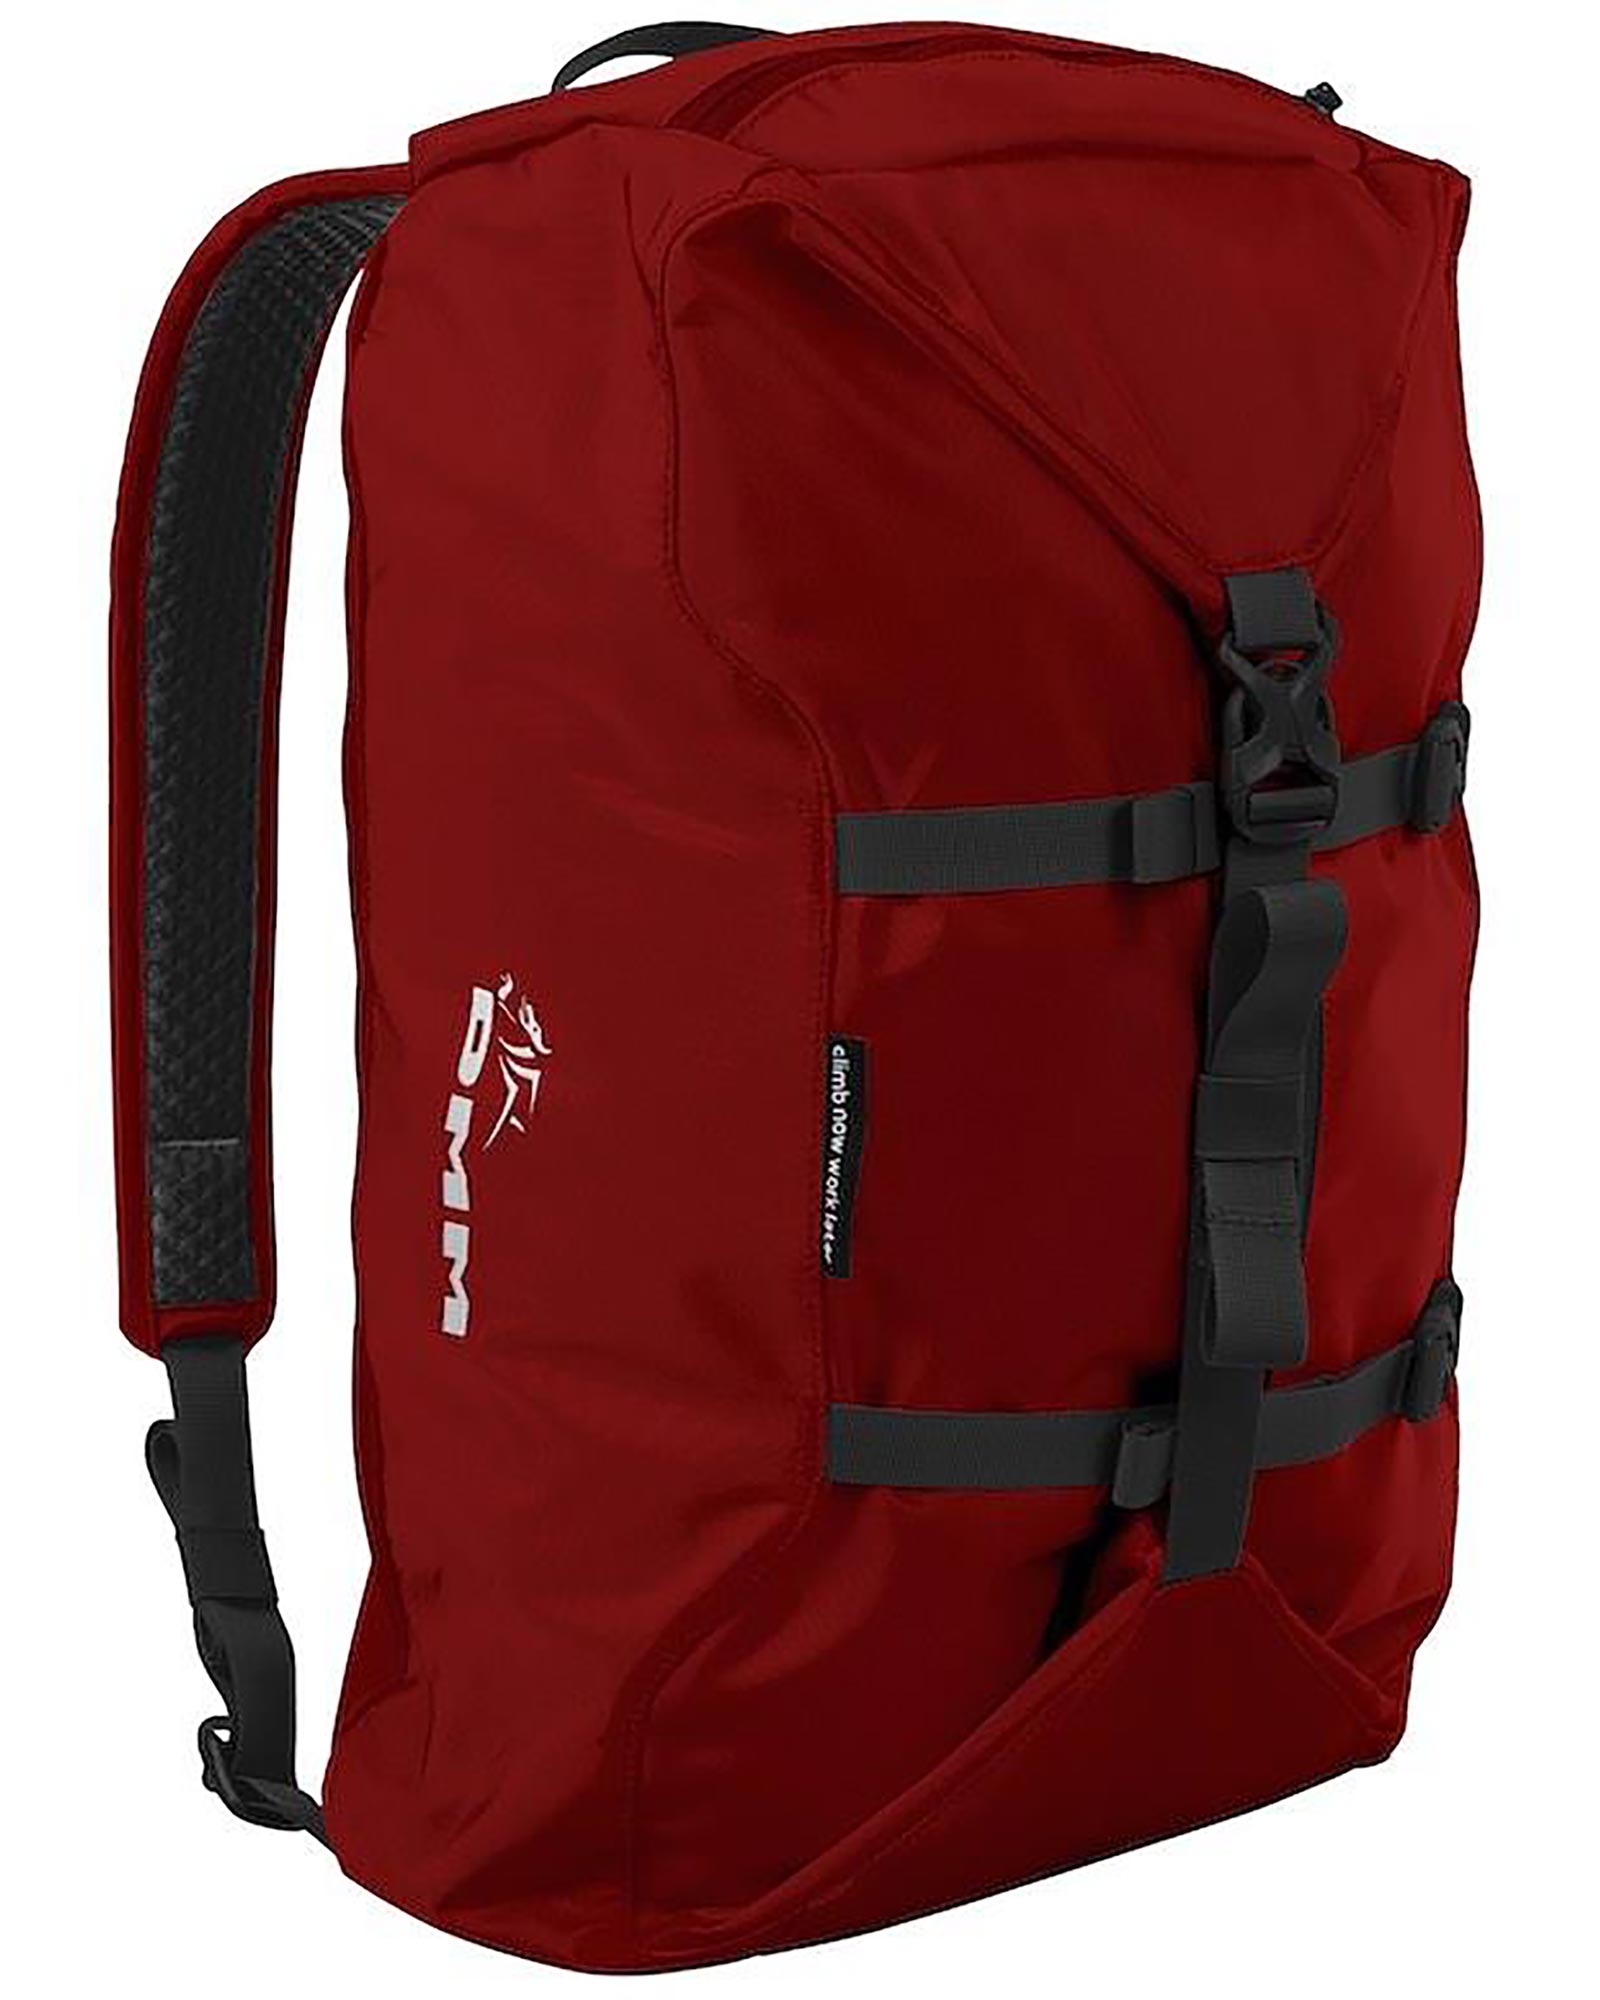 DMM Classic Rope Bag - Red